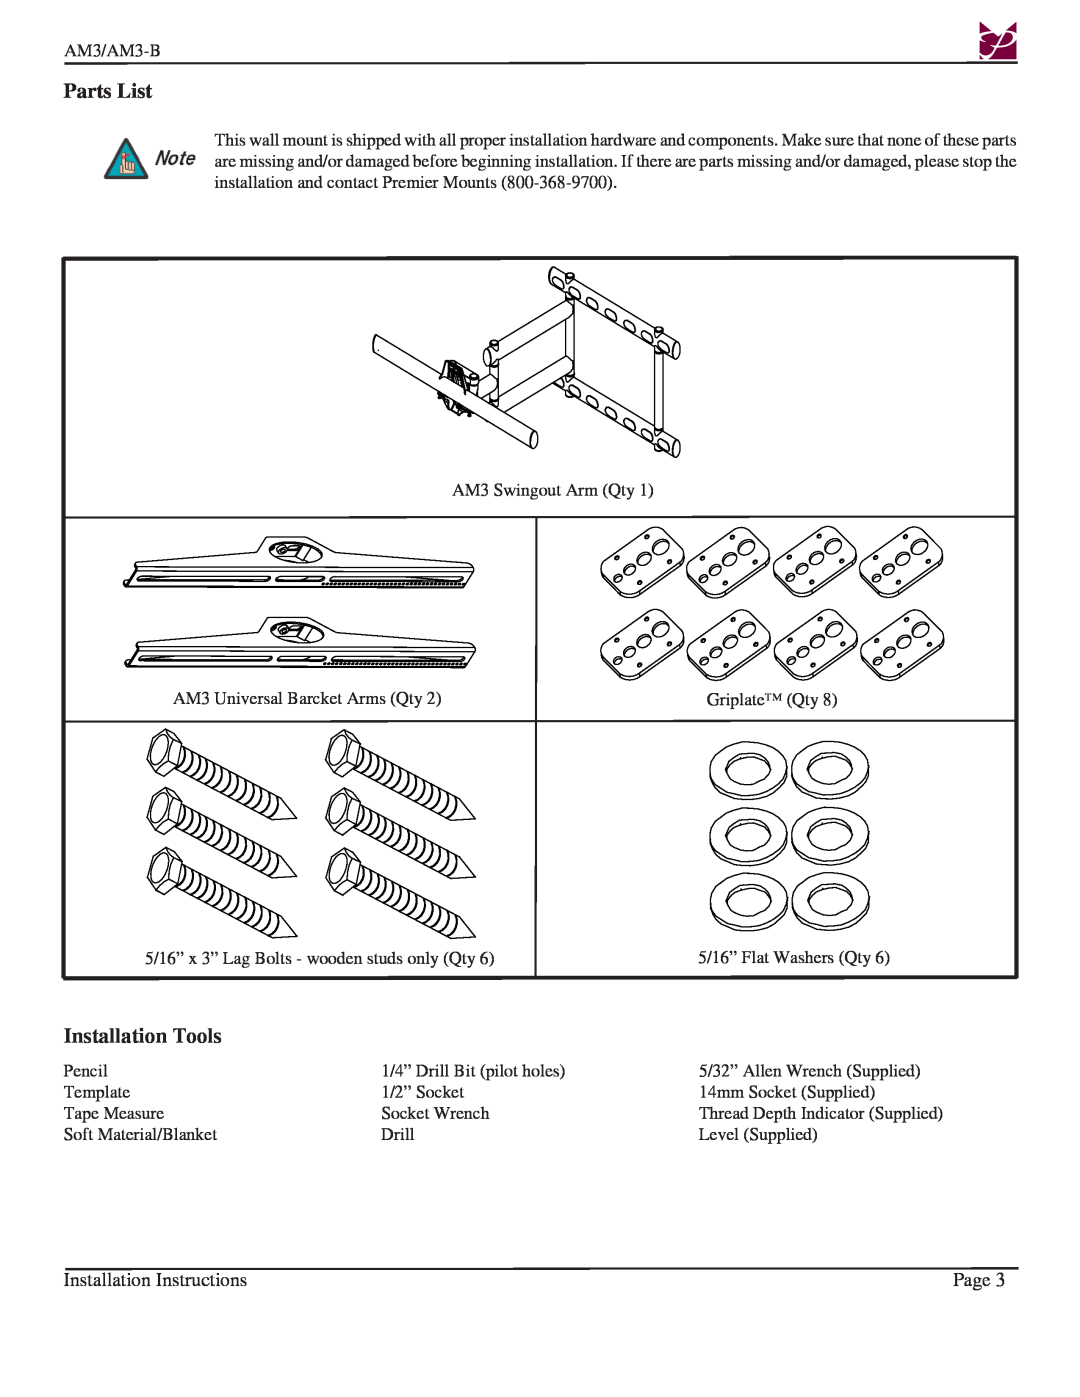 Premier Mounts AM3-B installation instructions Parts List, Installation Tools, Installation Instructions, Page 